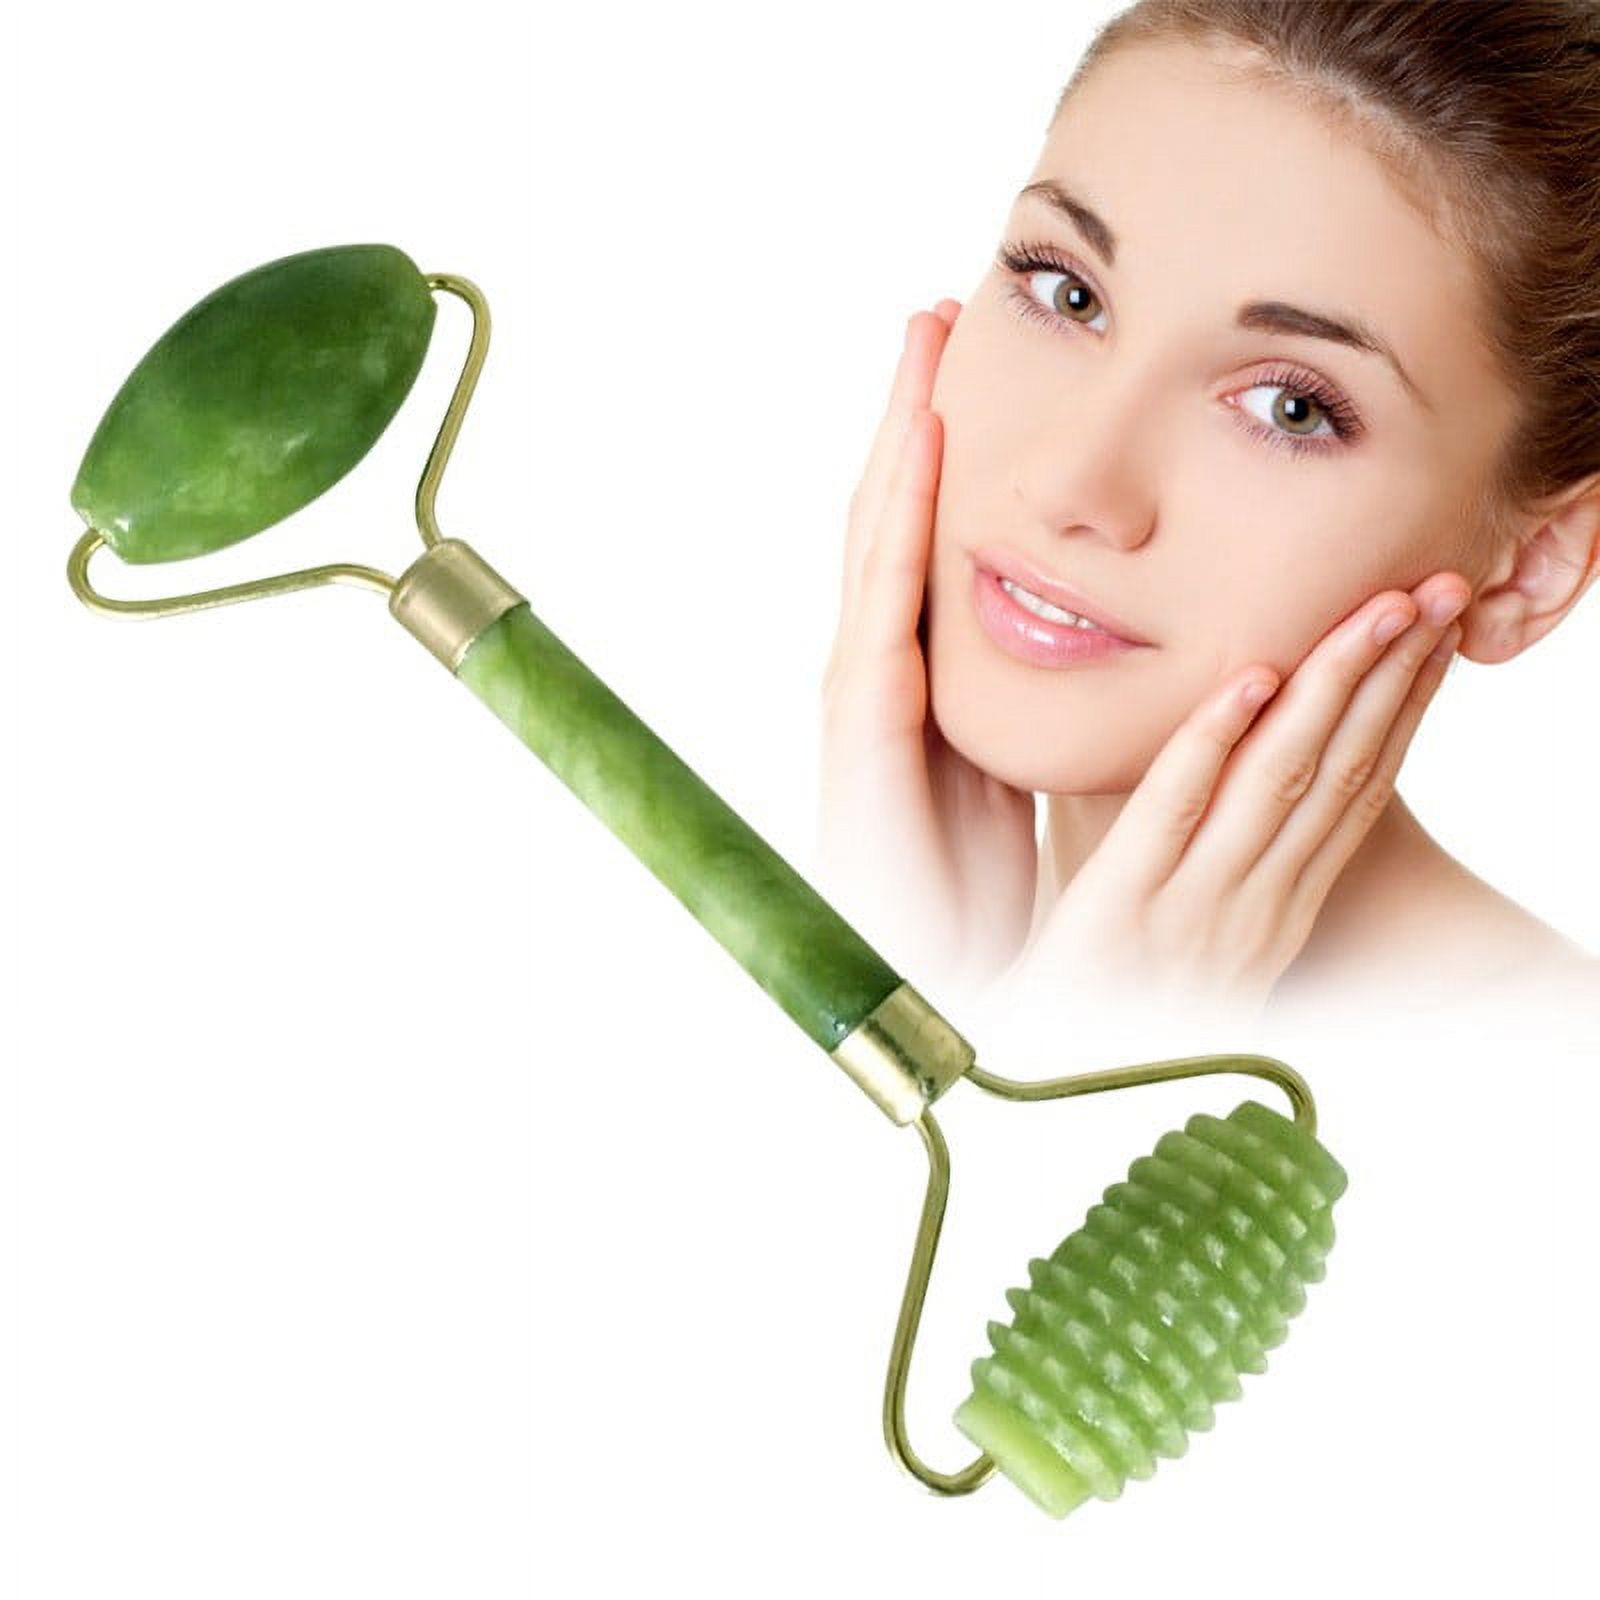 Facial Jade Massage Roller Remove Dark Circle Eye Bags Anti-Aging Massager For Promote Blood Circulation - image 1 of 4